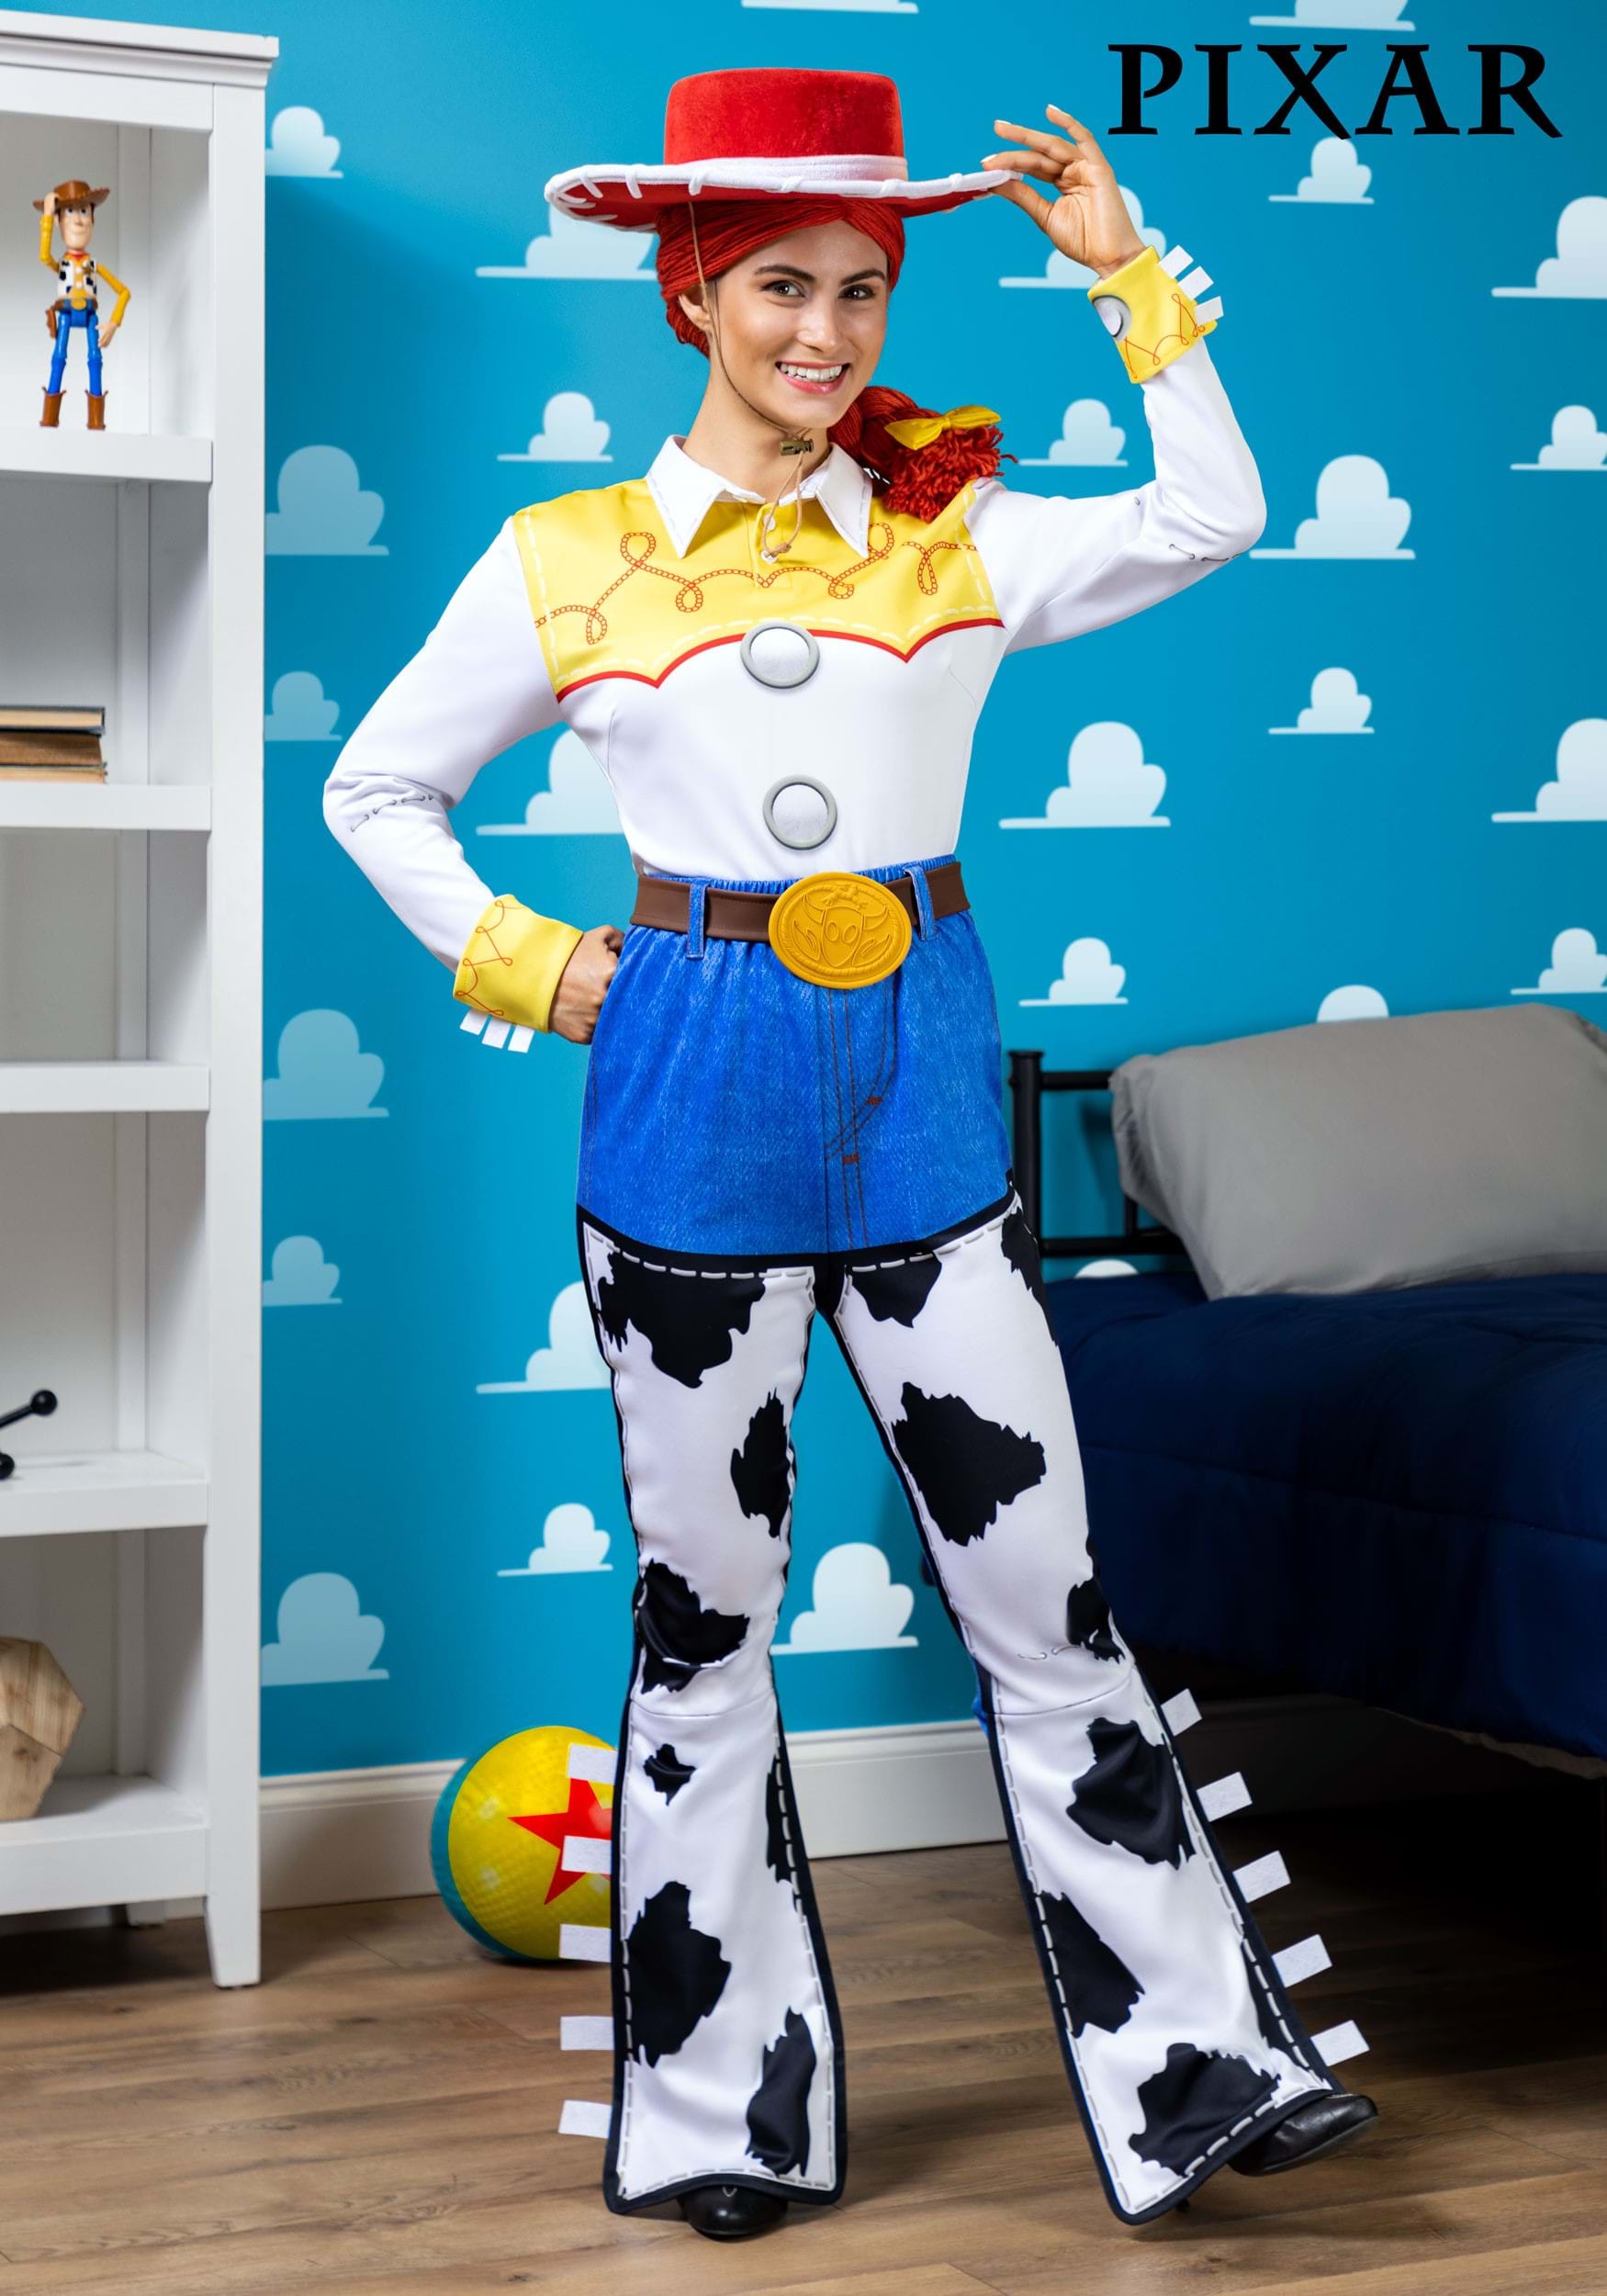 https://images.halloweencostumes.ca/products/75545/1-1/adult-deluxe-jessie-toy-story-costume-0.jpg